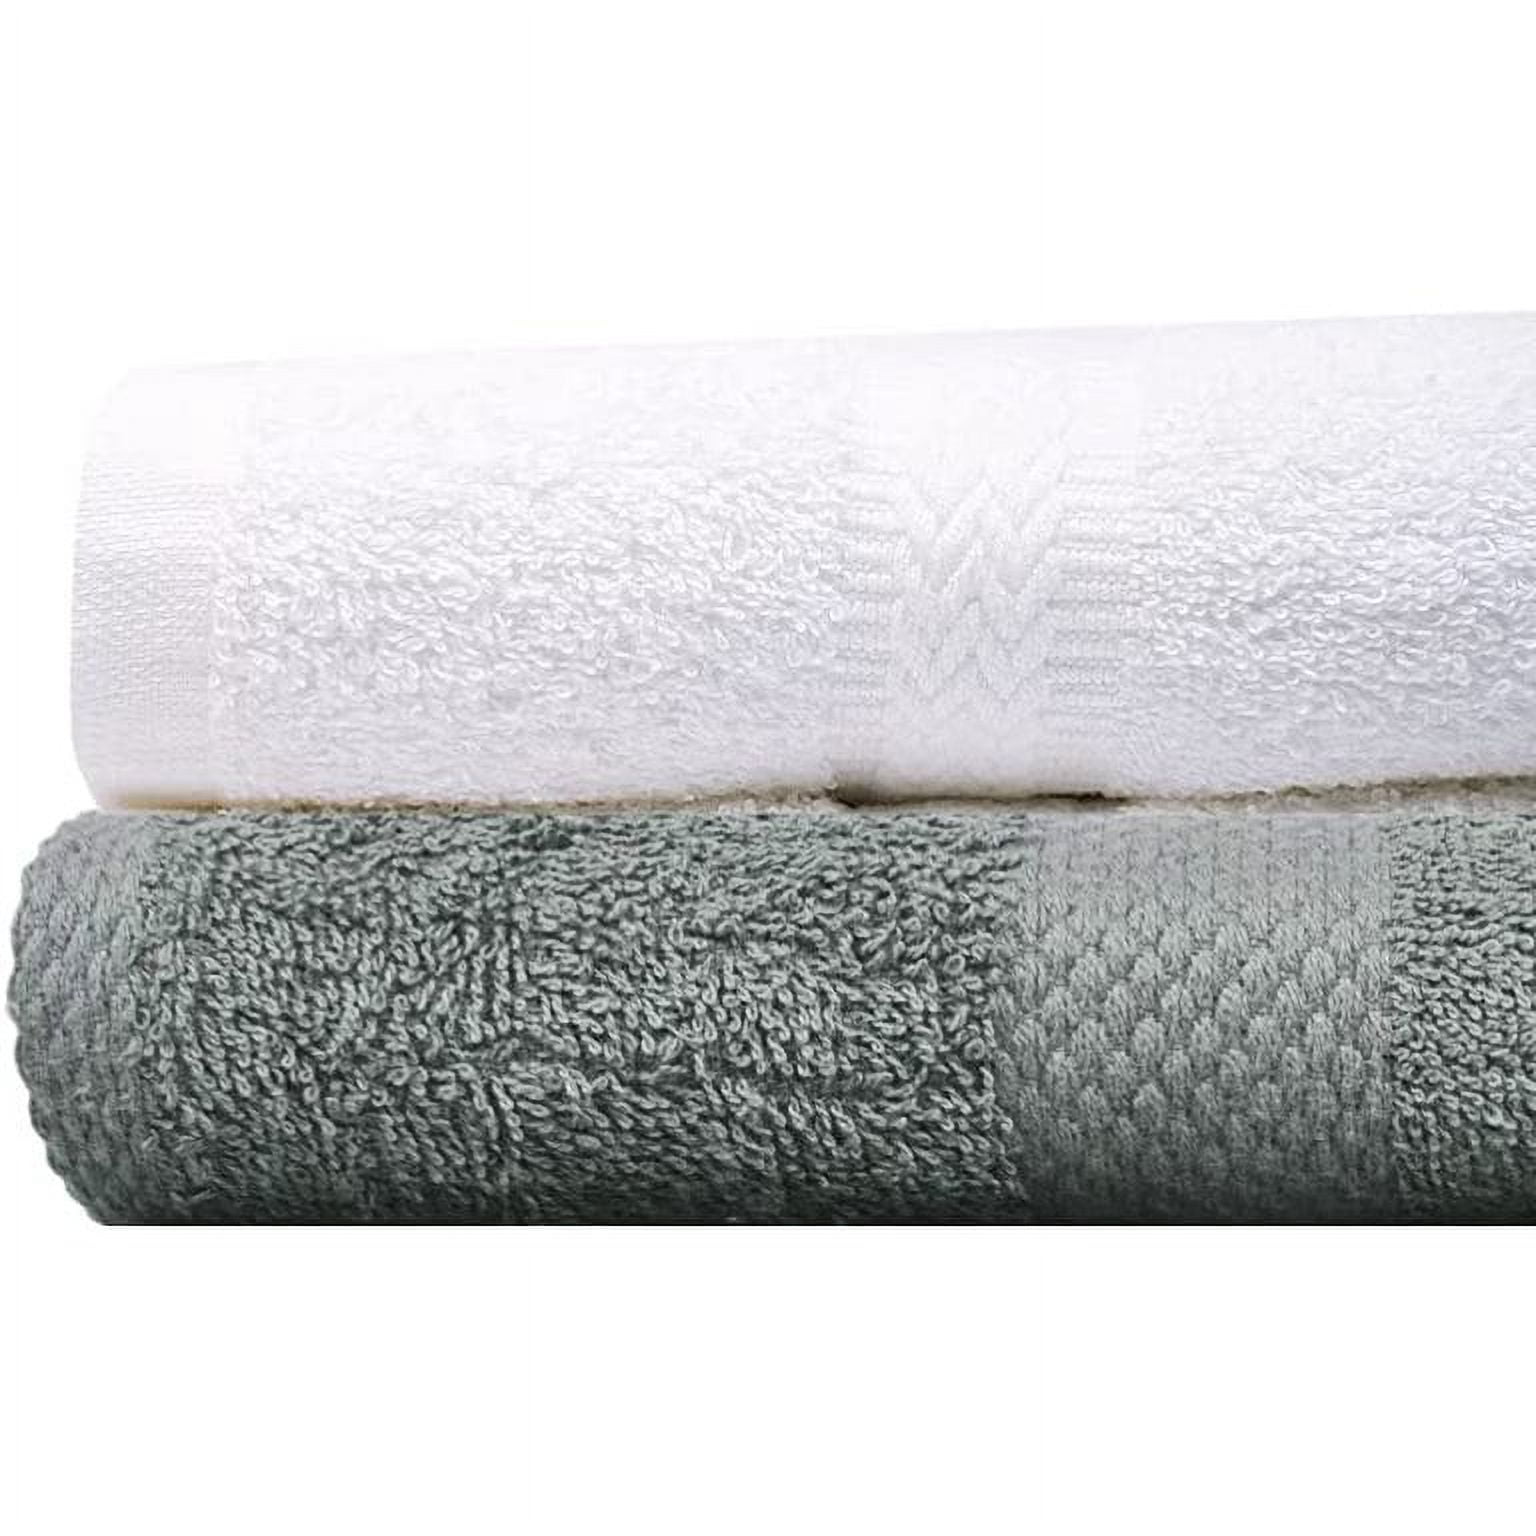 Get your MyTowels Premium Set now for just $49.98 with promo code R227!  Enjoy the luxury of designer towels that work for you and your…